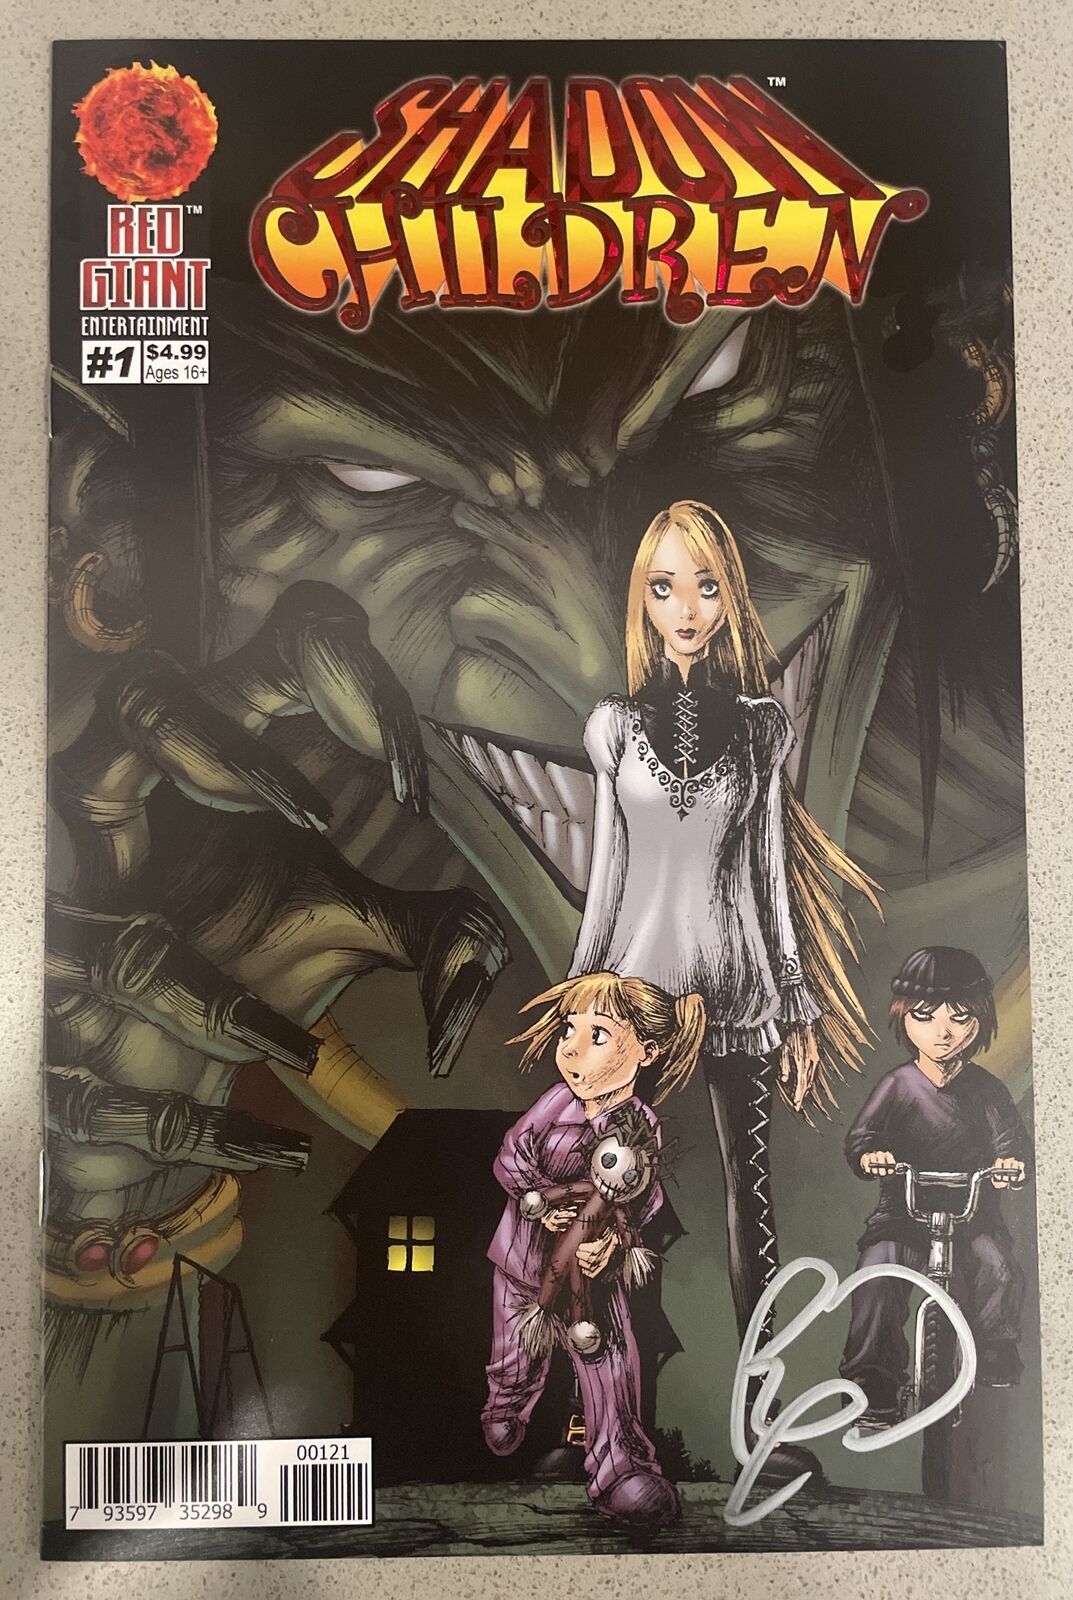 SHADOW CHILDREN #1 VARIANT. RED GIANT ENTERTAINMENT. NM SIGNED COMIC